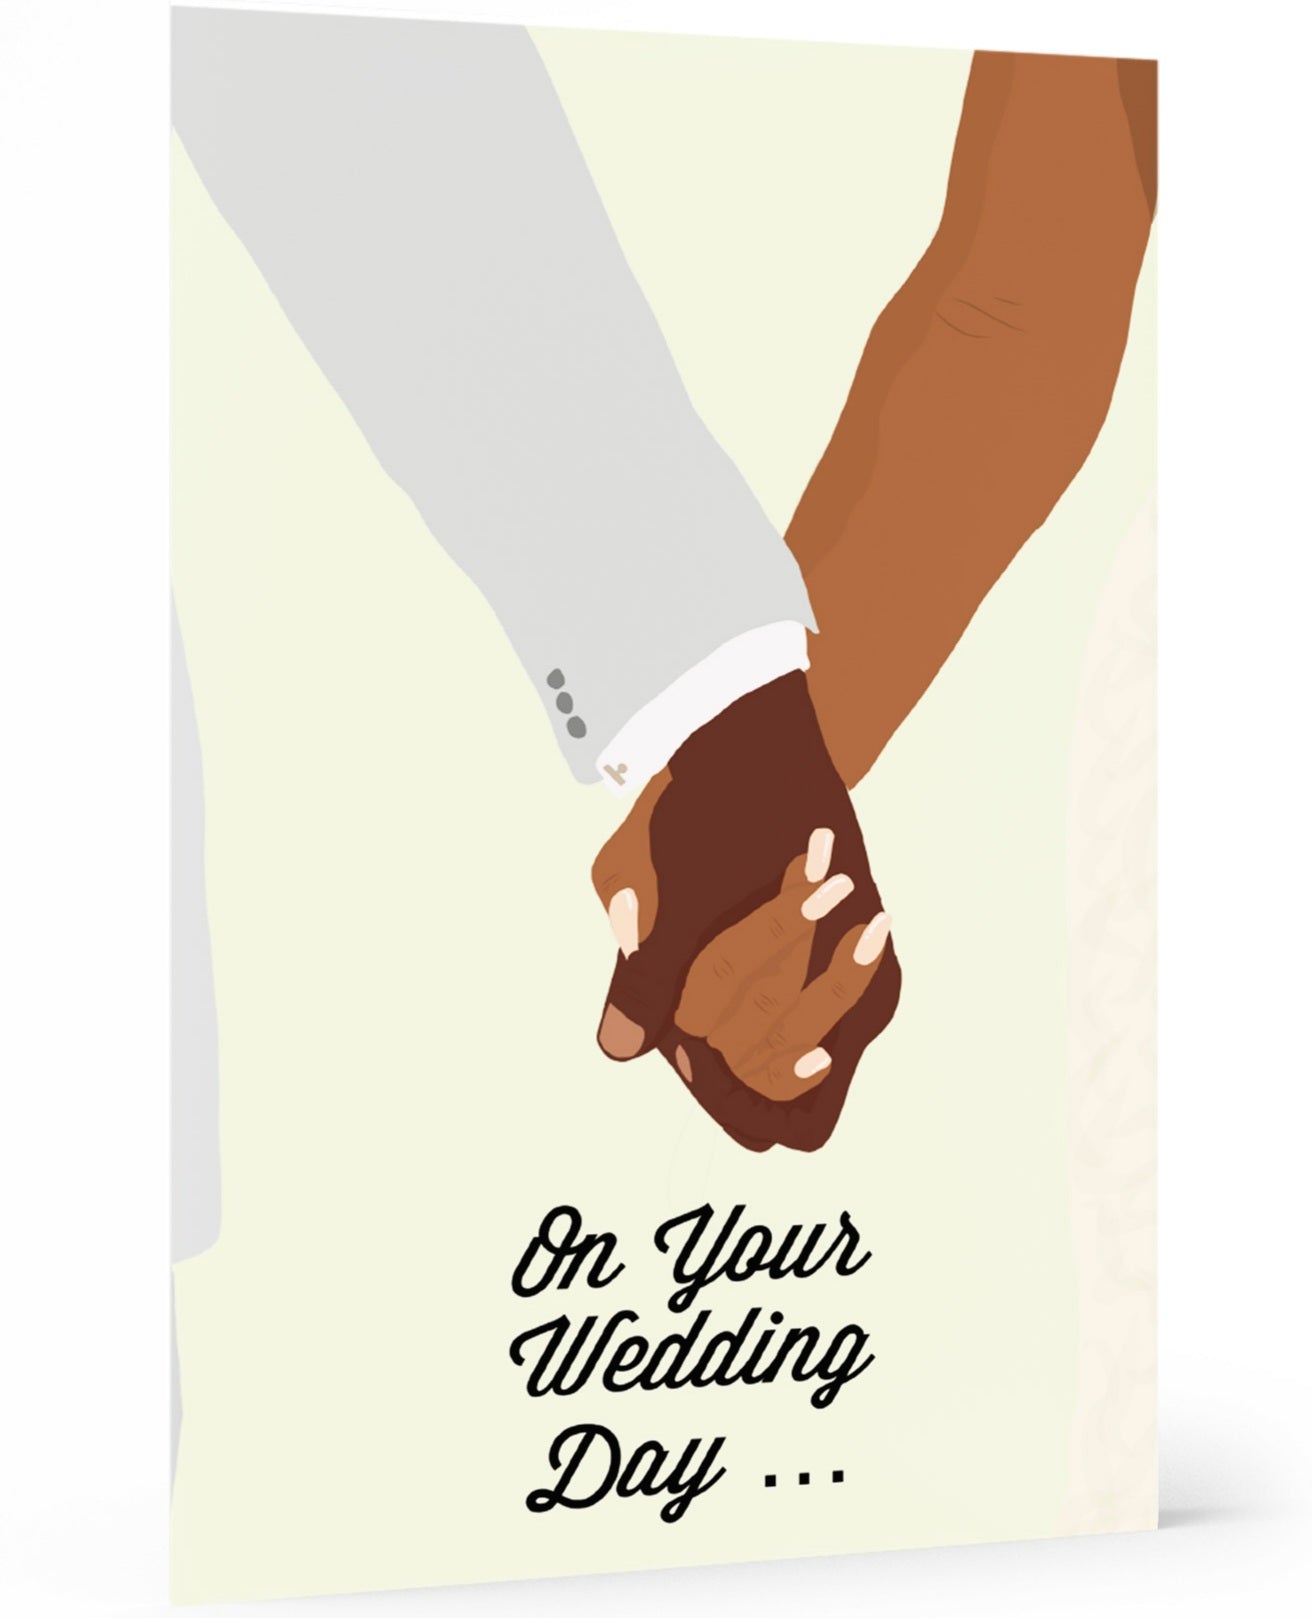 Wedding Day Card, wakuda, african print fans, black-owned brands, black pound day